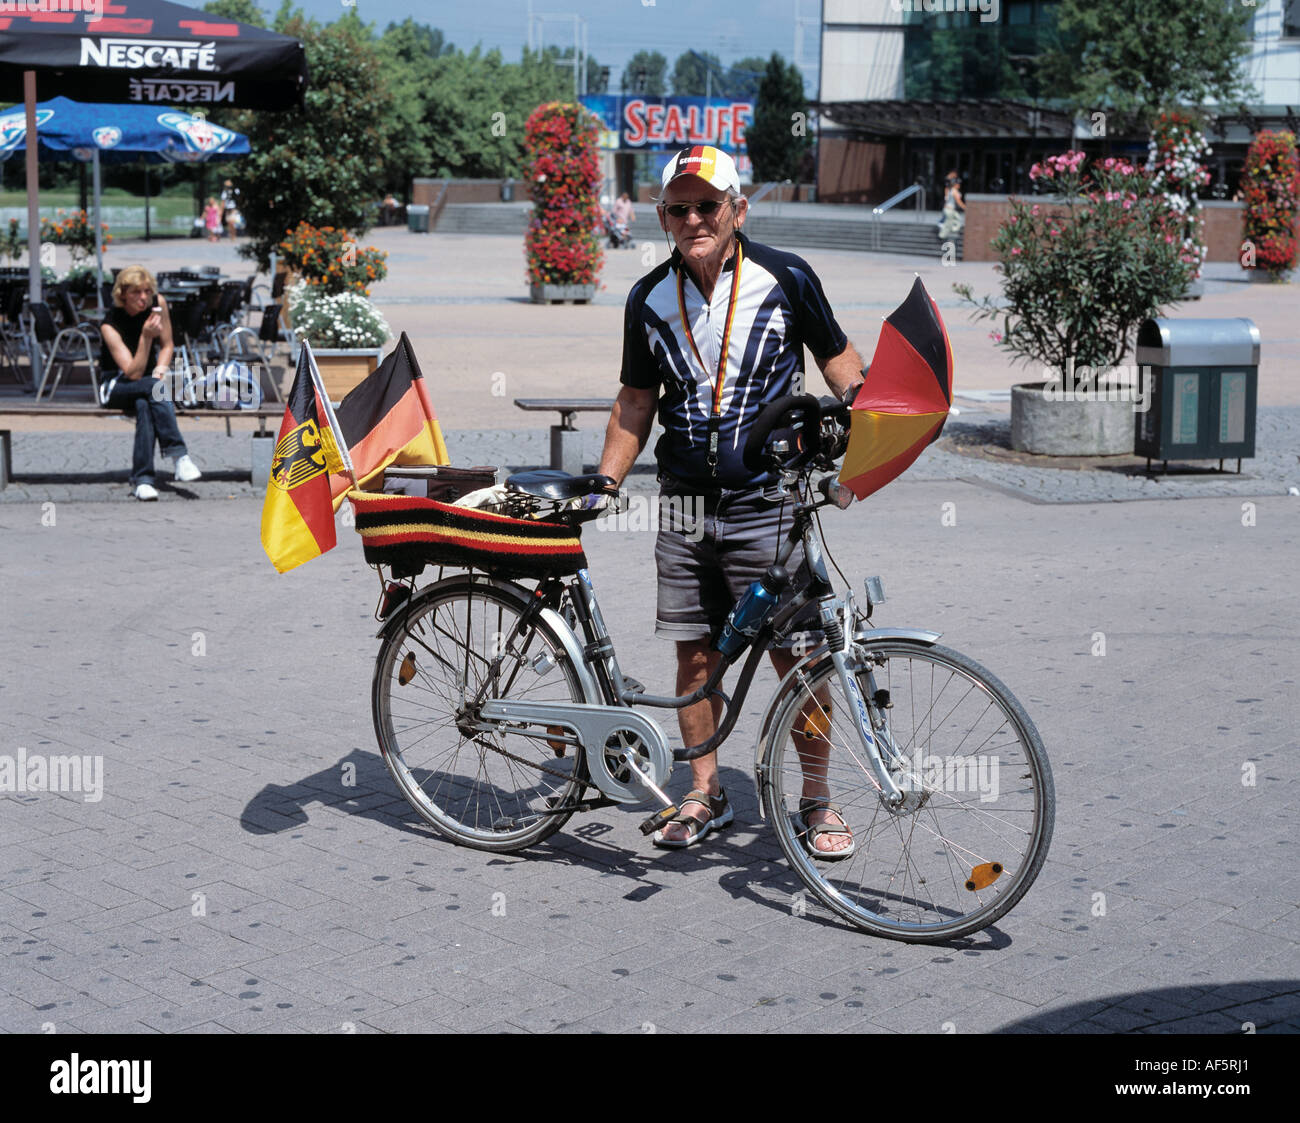 football world championship 2006 in Germany, Oberhausen, Ruhr area, North Rhine-Westphalia, fan party in the shopping centre Centro in Oberhausen, German football fan dressed in the national colors with a bicycle Stock Photo